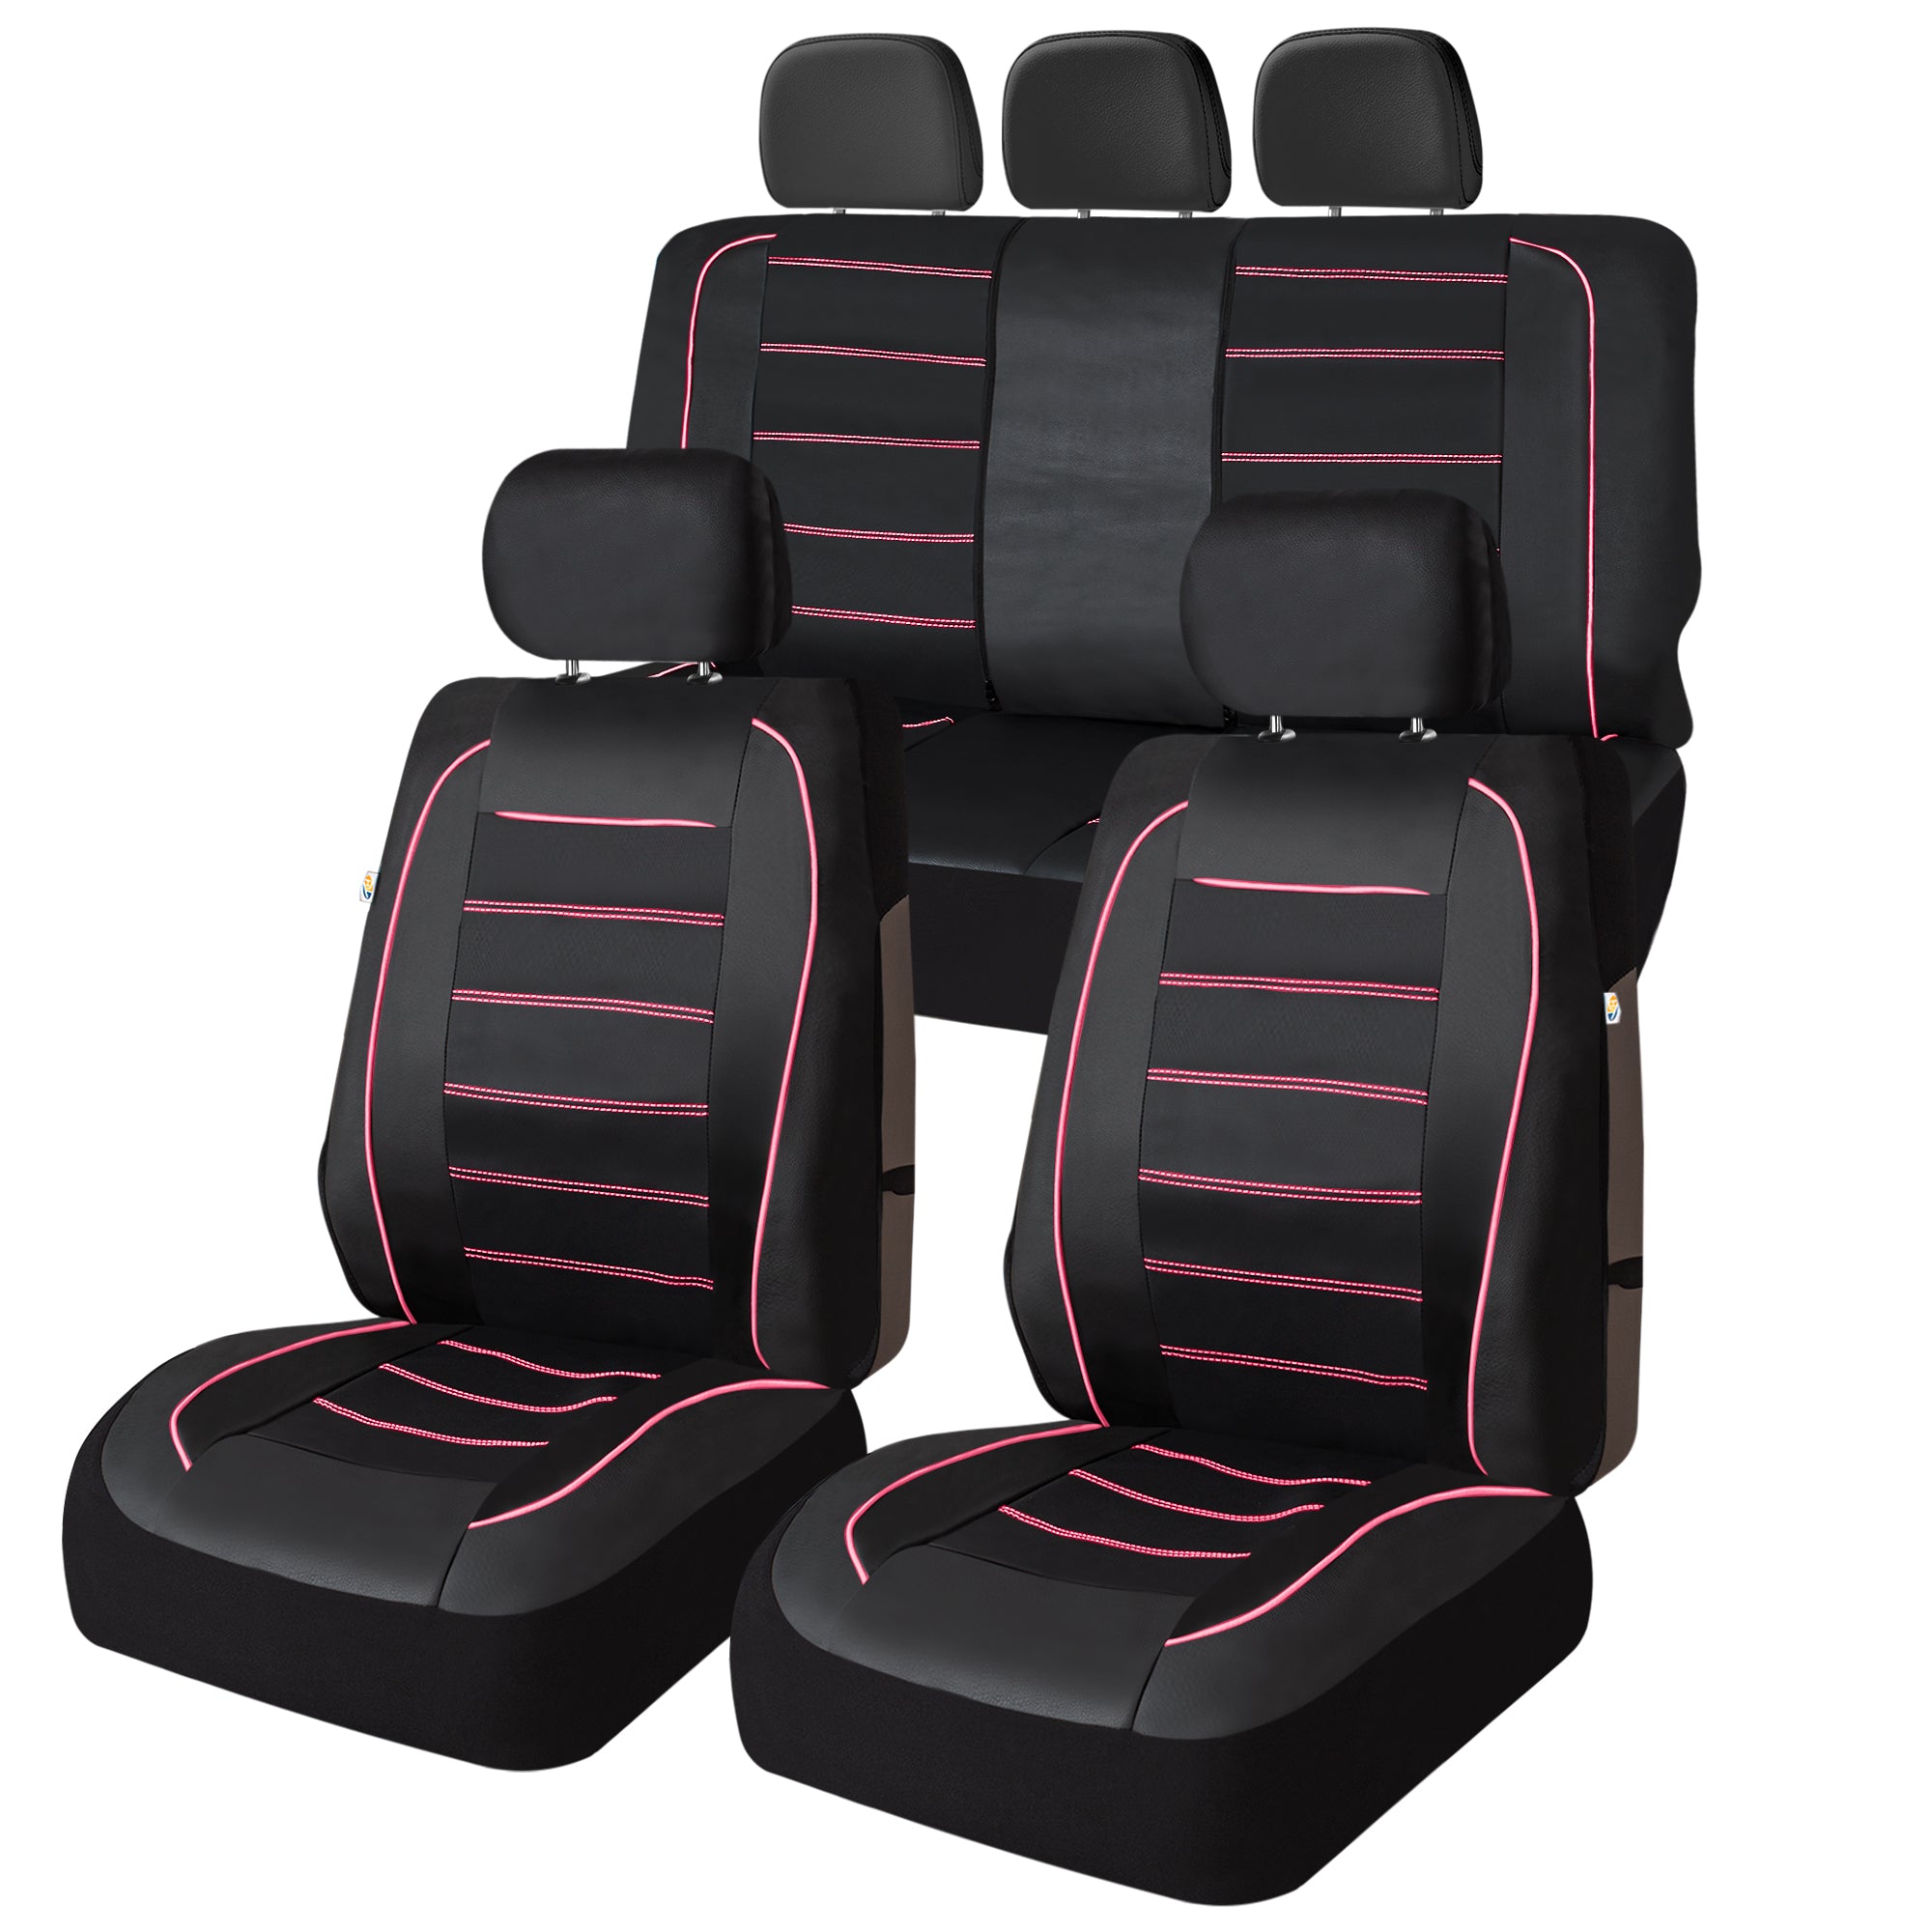 Premier Leatherette Seat Covers - Full Set - Pink